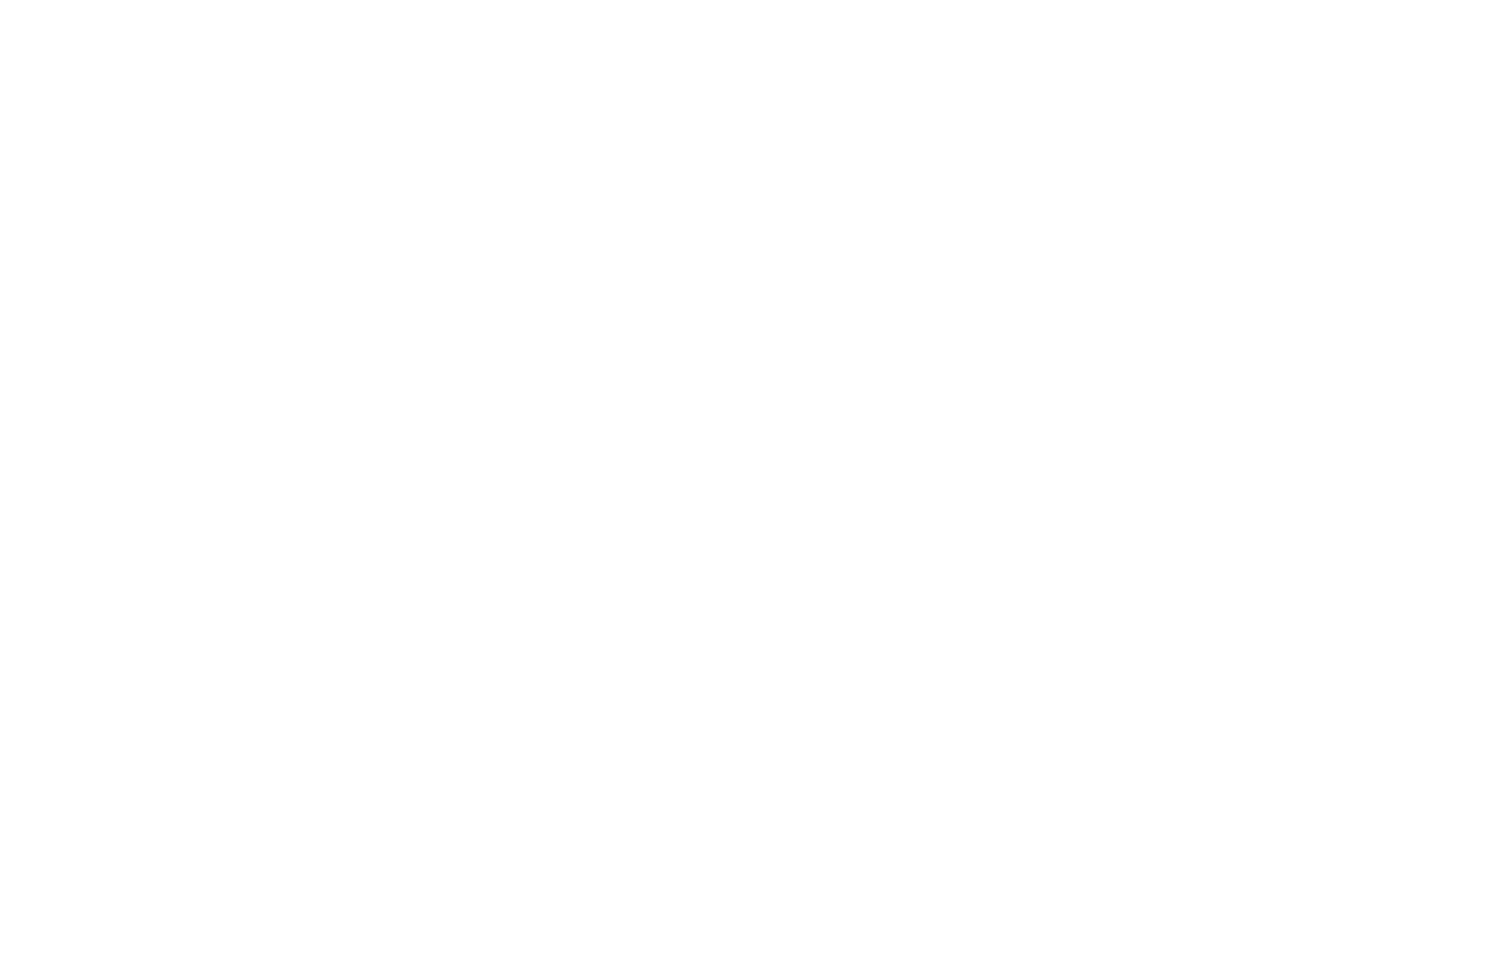 The Catering Wizard